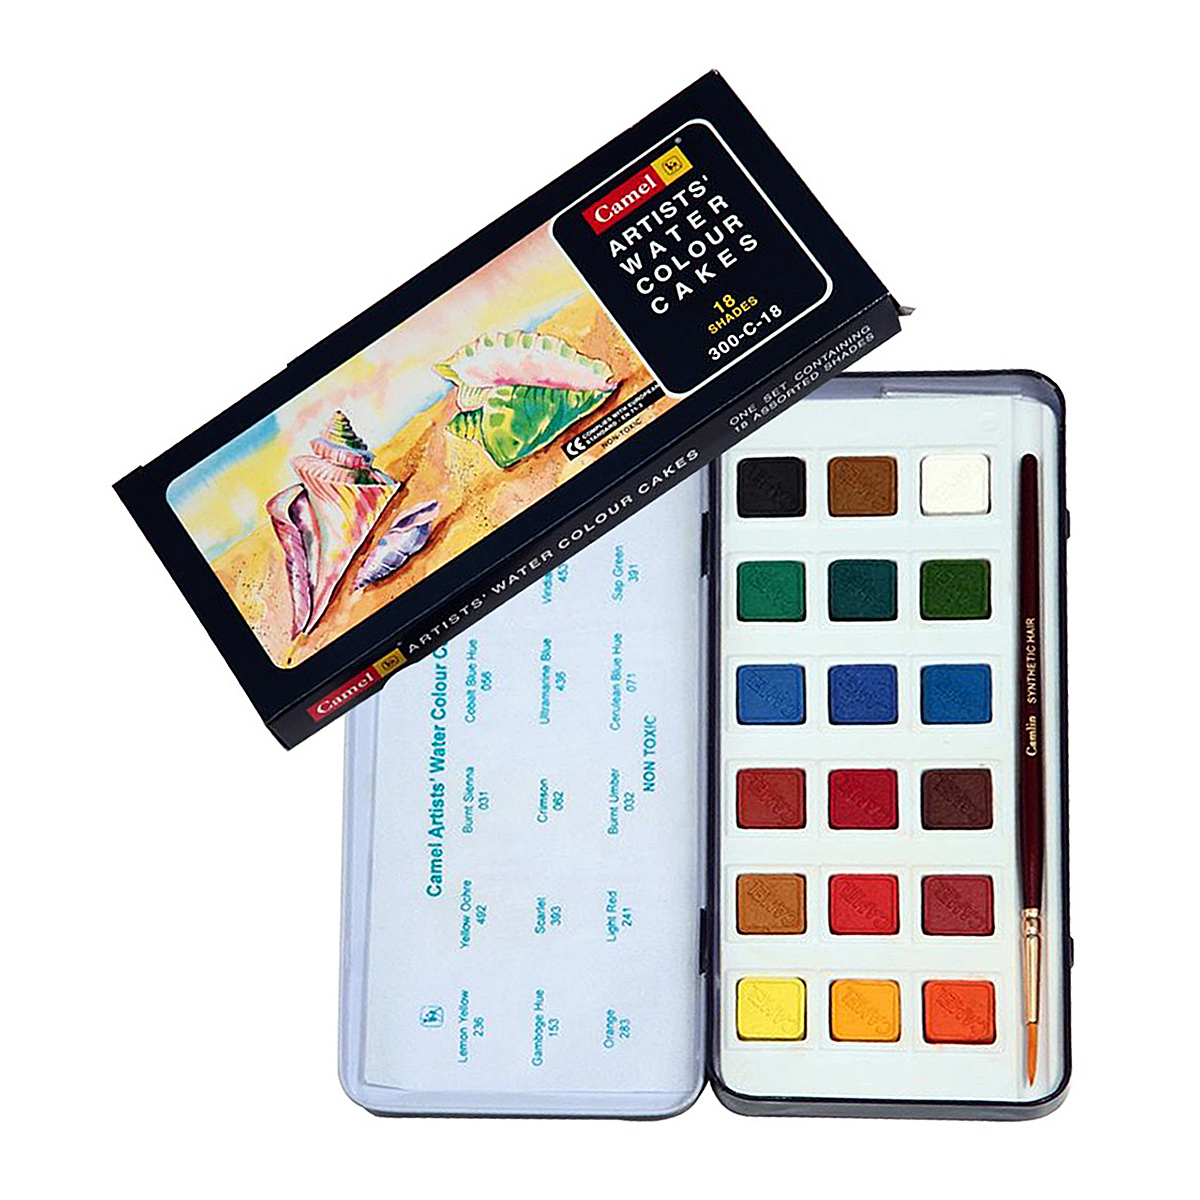 Camlin Water Colours Cake - 15 Shades - ScholarShoppe